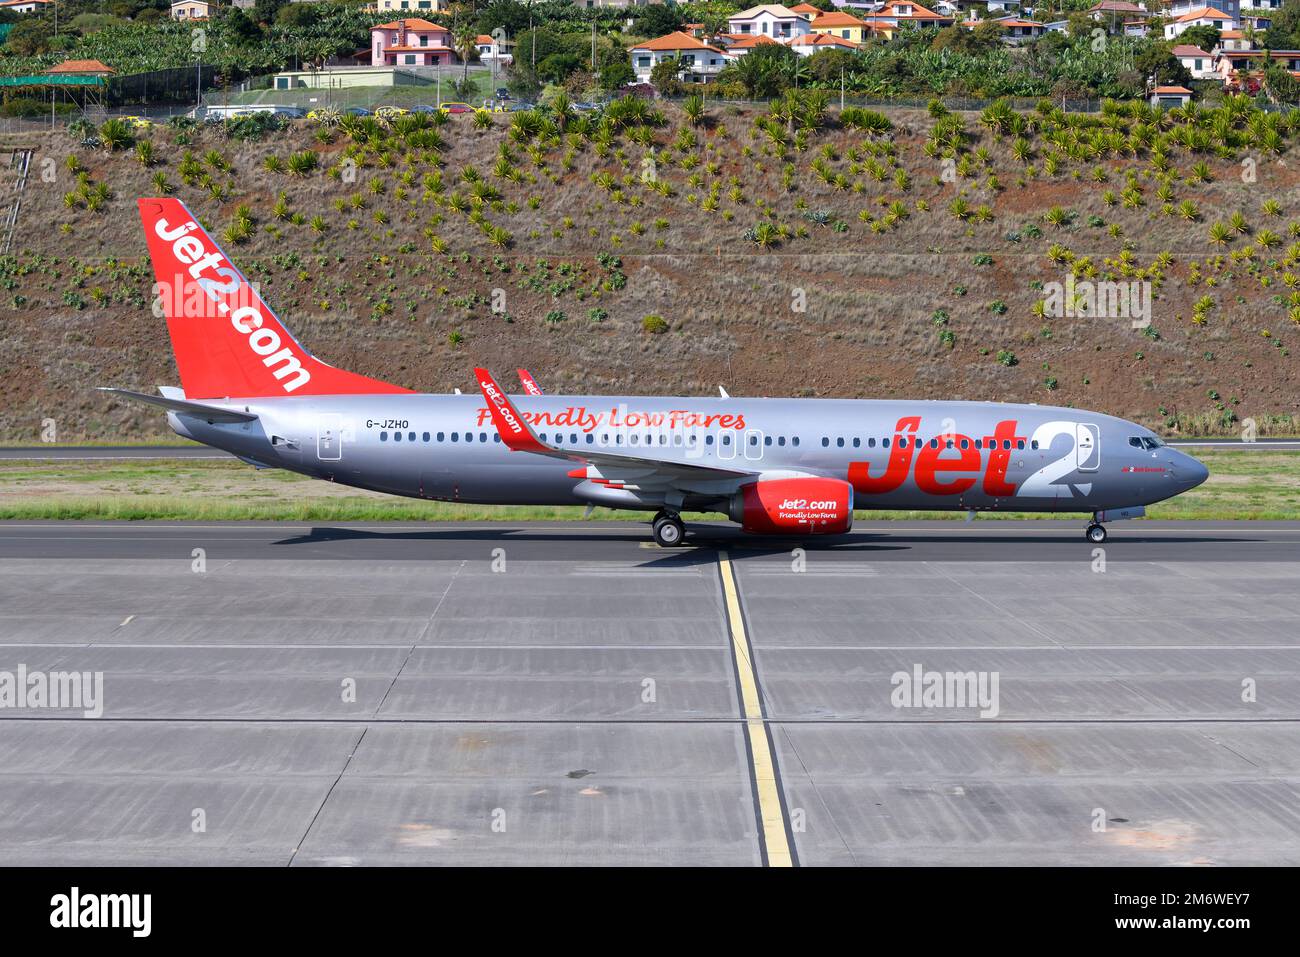 Jet2 airline Boeing 737 aircraft. Low-cost UK airline Jet2.com with Boeing 737 airplane taxiing. Stock Photo